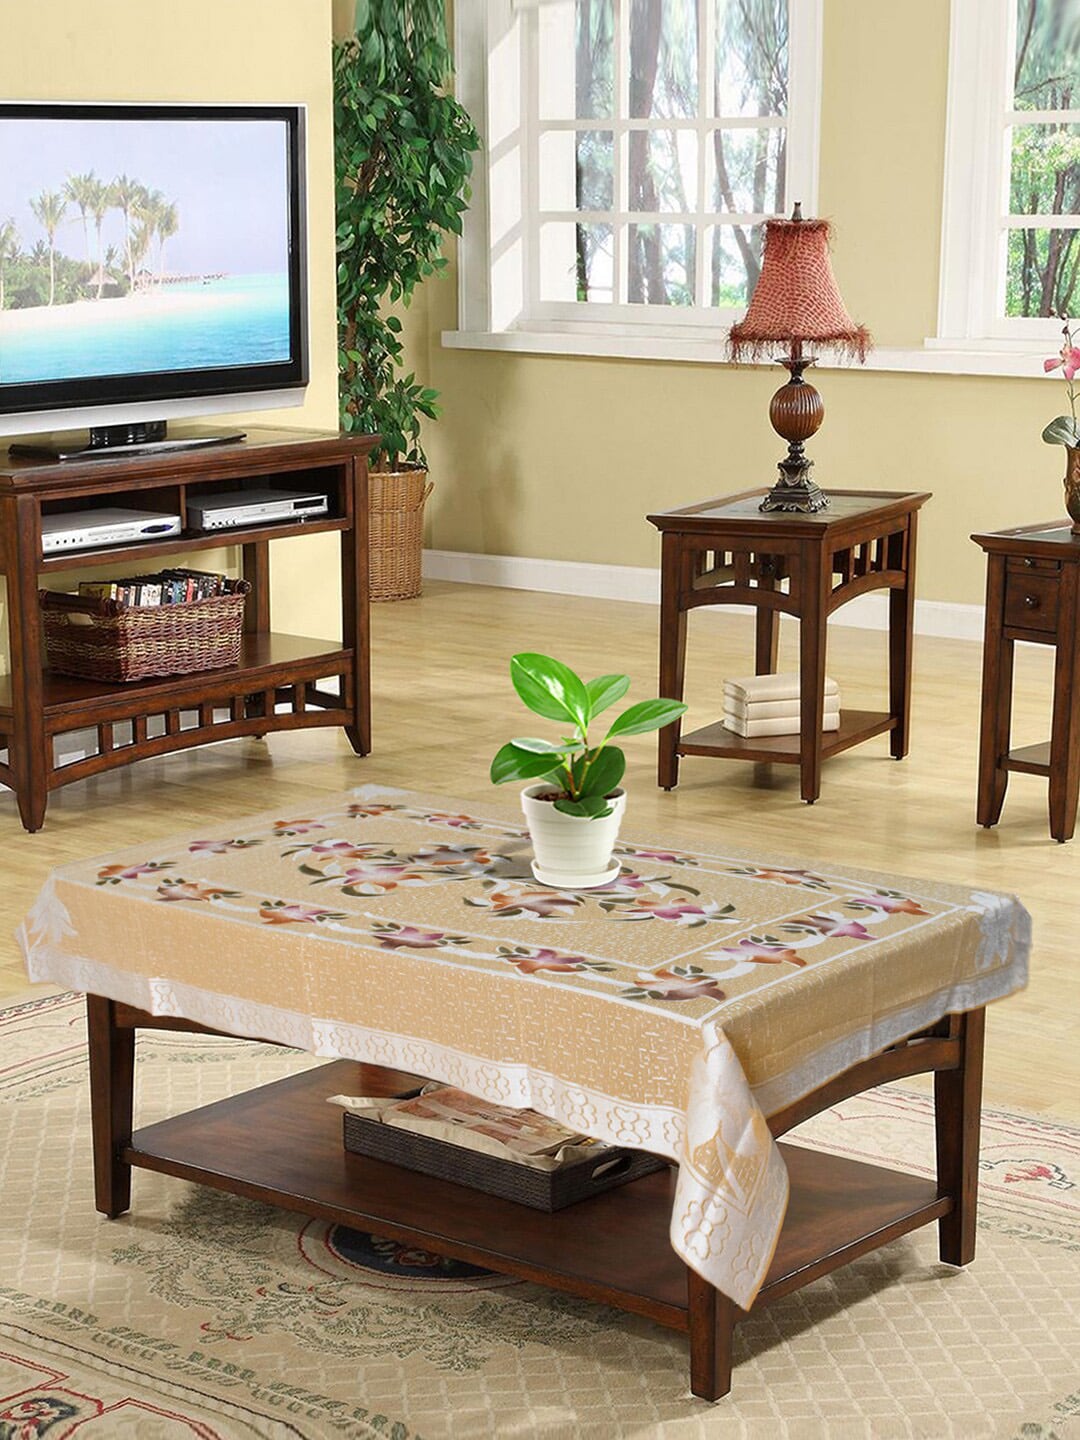 Kuber Industries Beige-Coloured Floral Printed 4-Seater Rectangle Cotton Table Cover Price in India